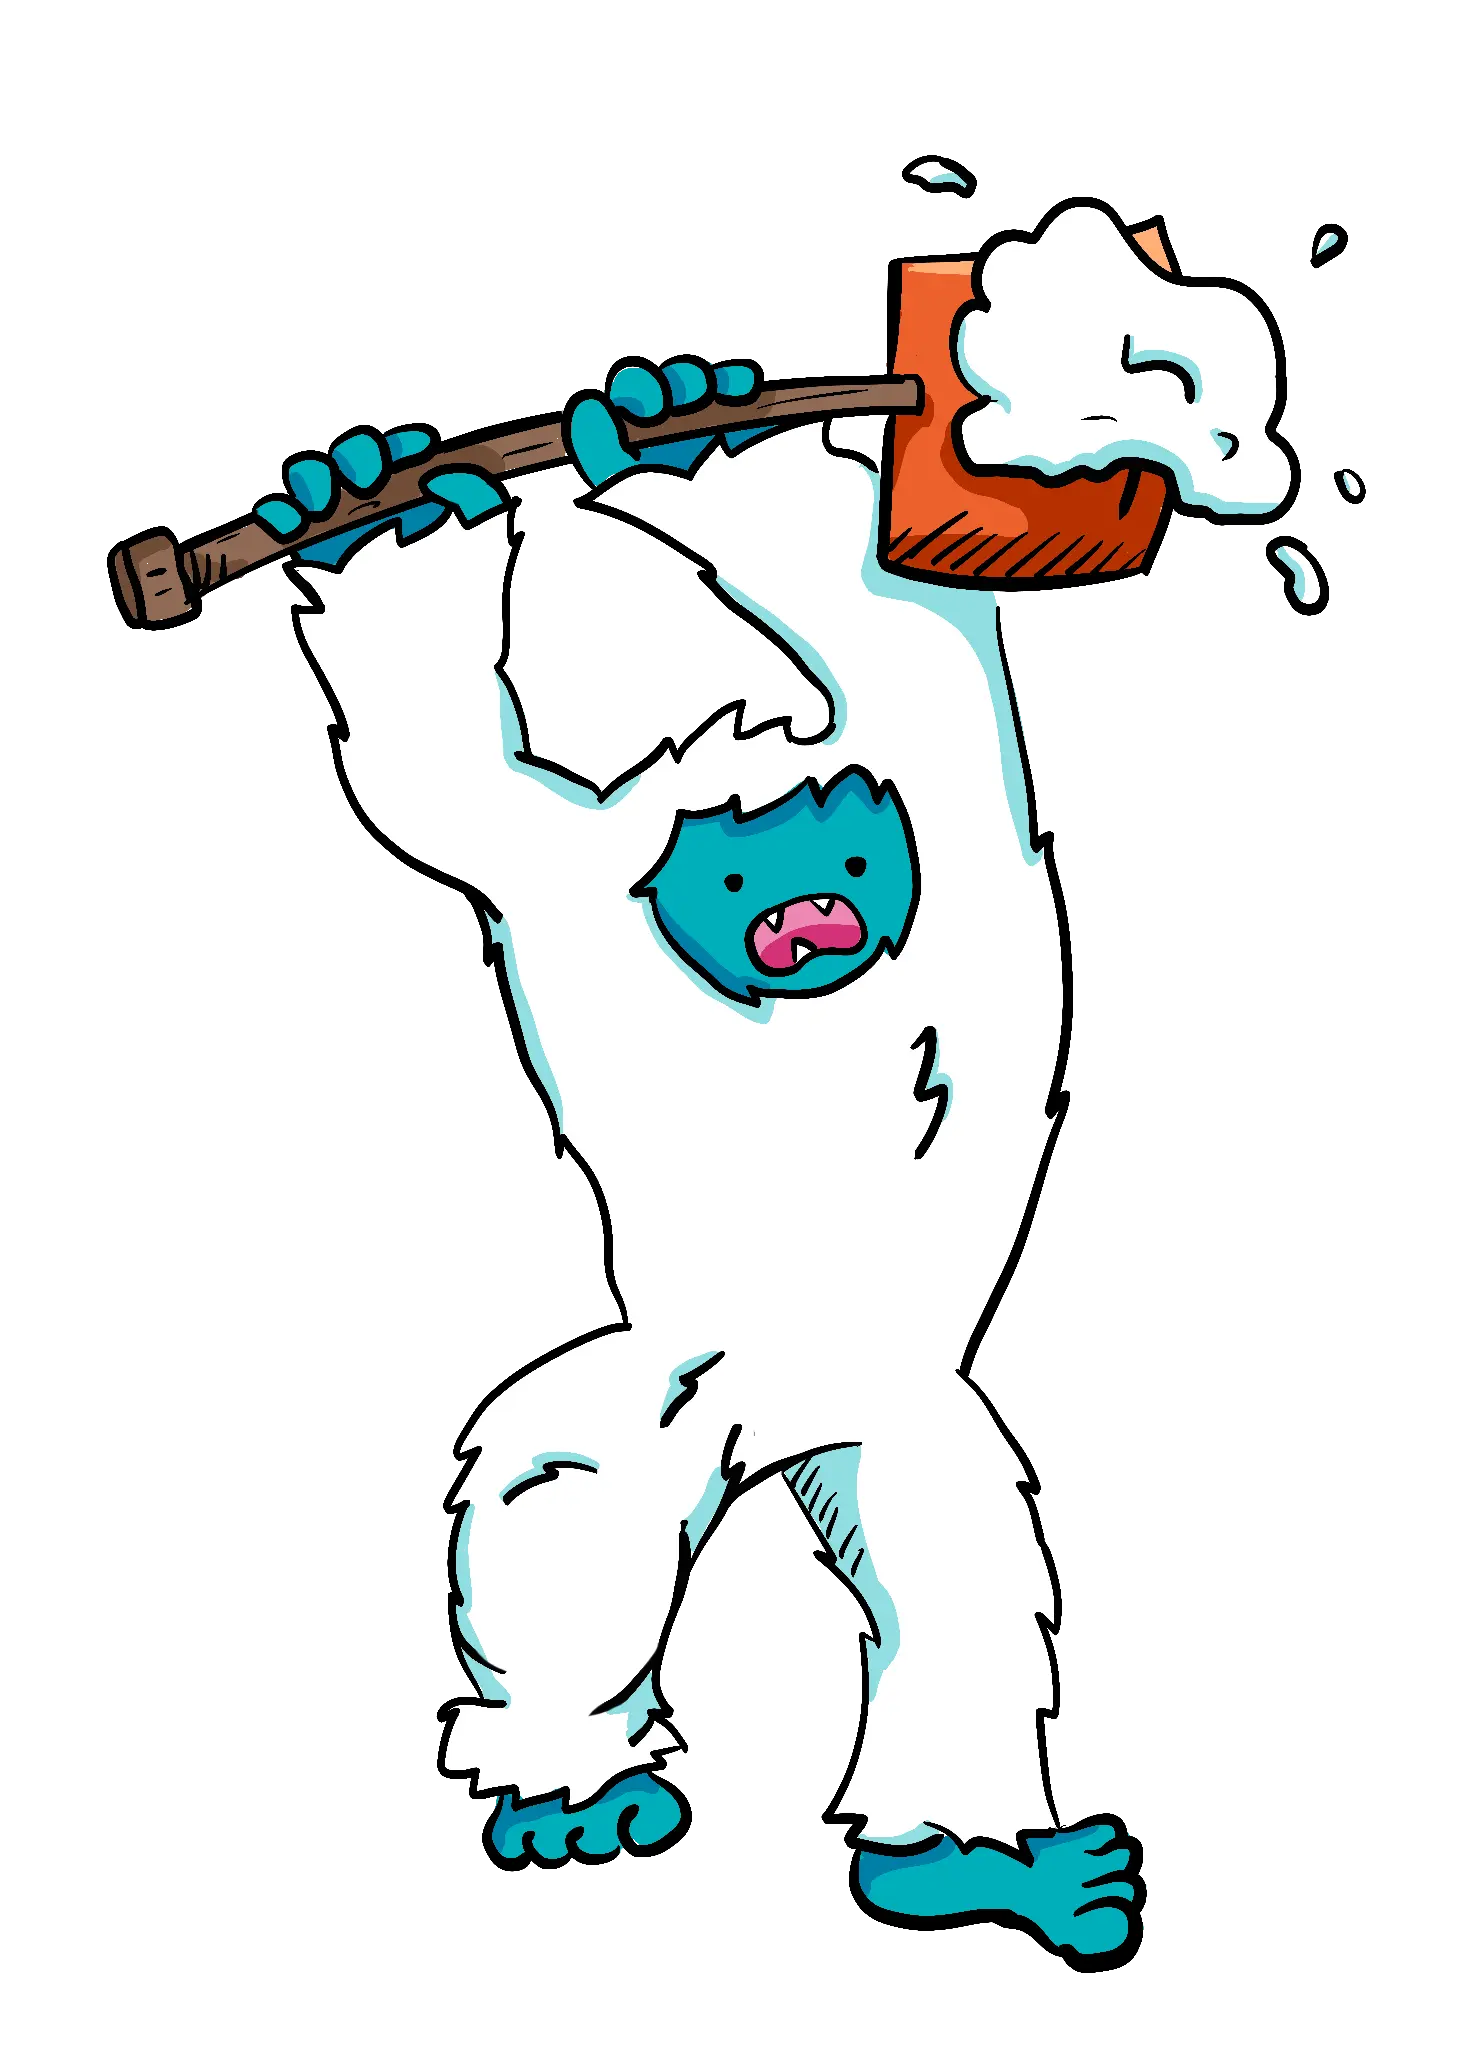 A yeti with a scarf